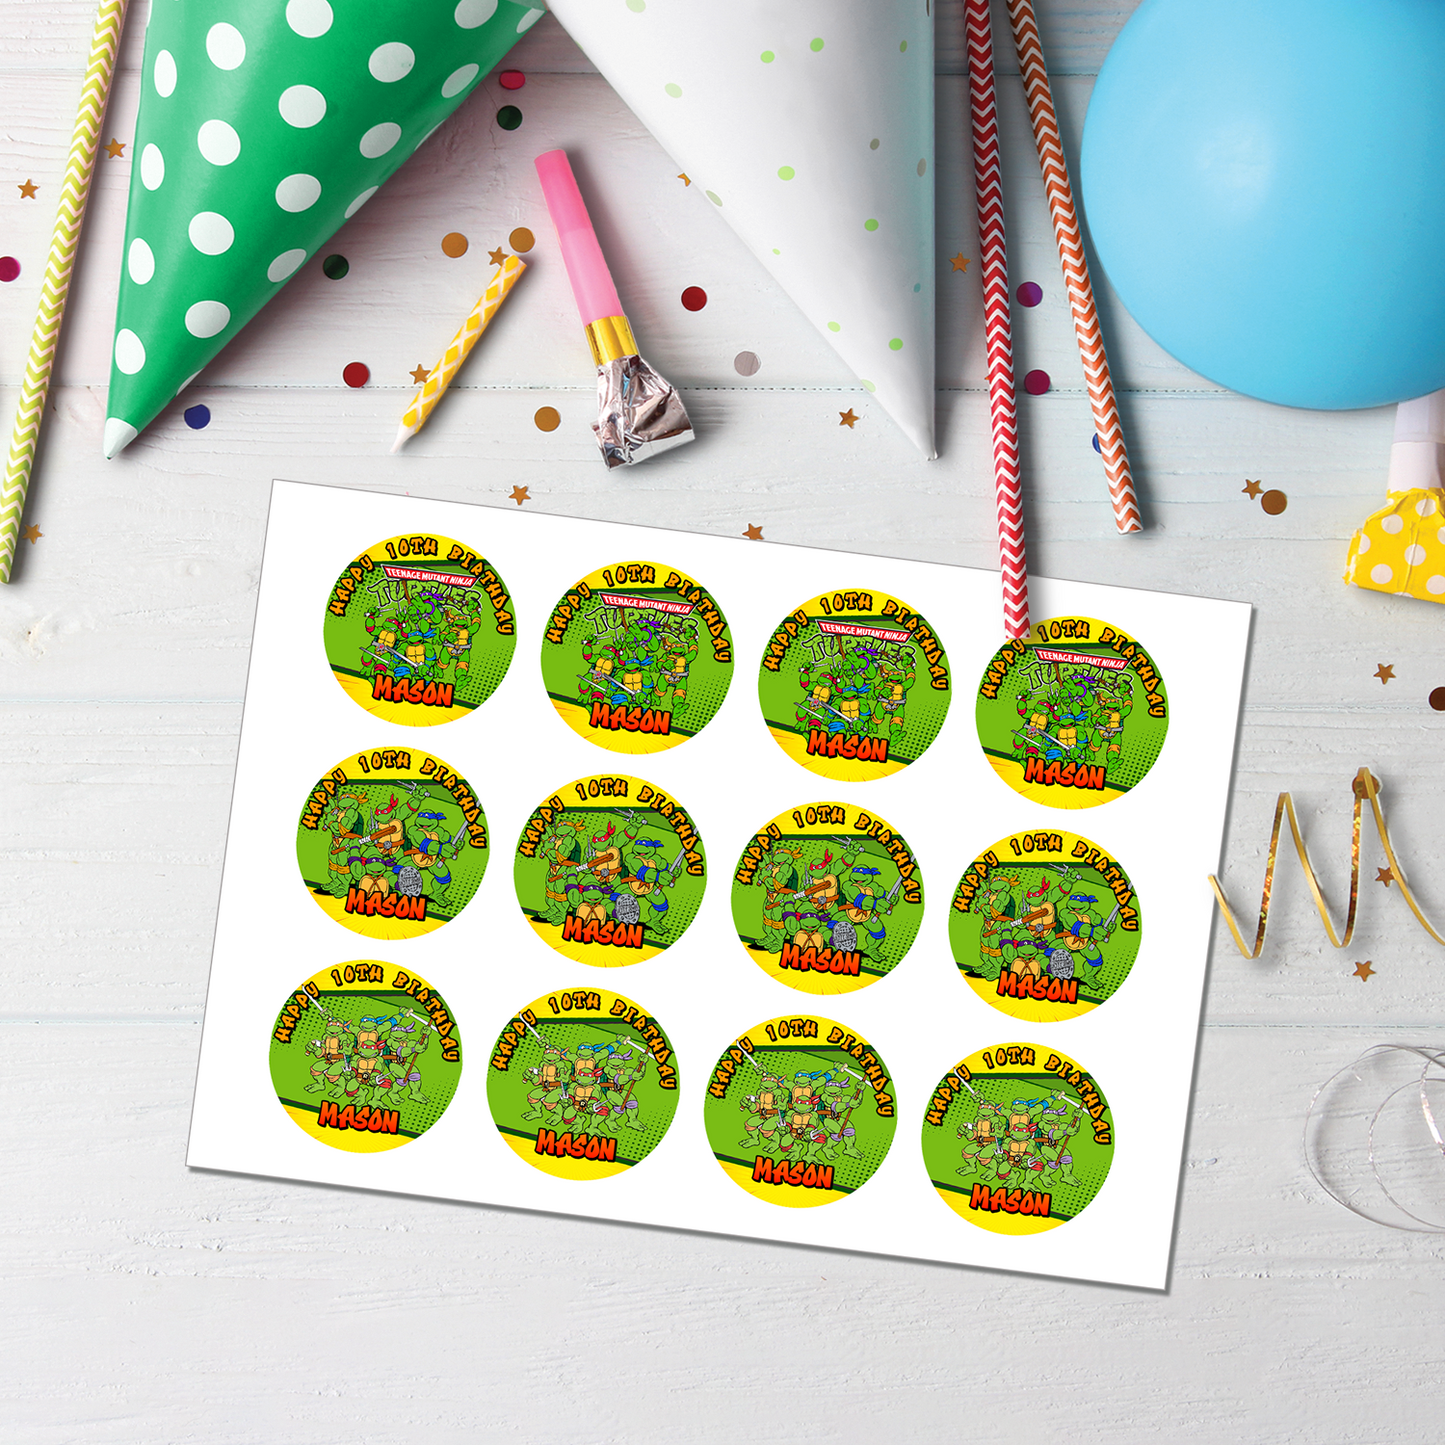 Teenage Mutant Ninja Turtles Personalized Cupcakes Toppers for a Fun-filled Birthday